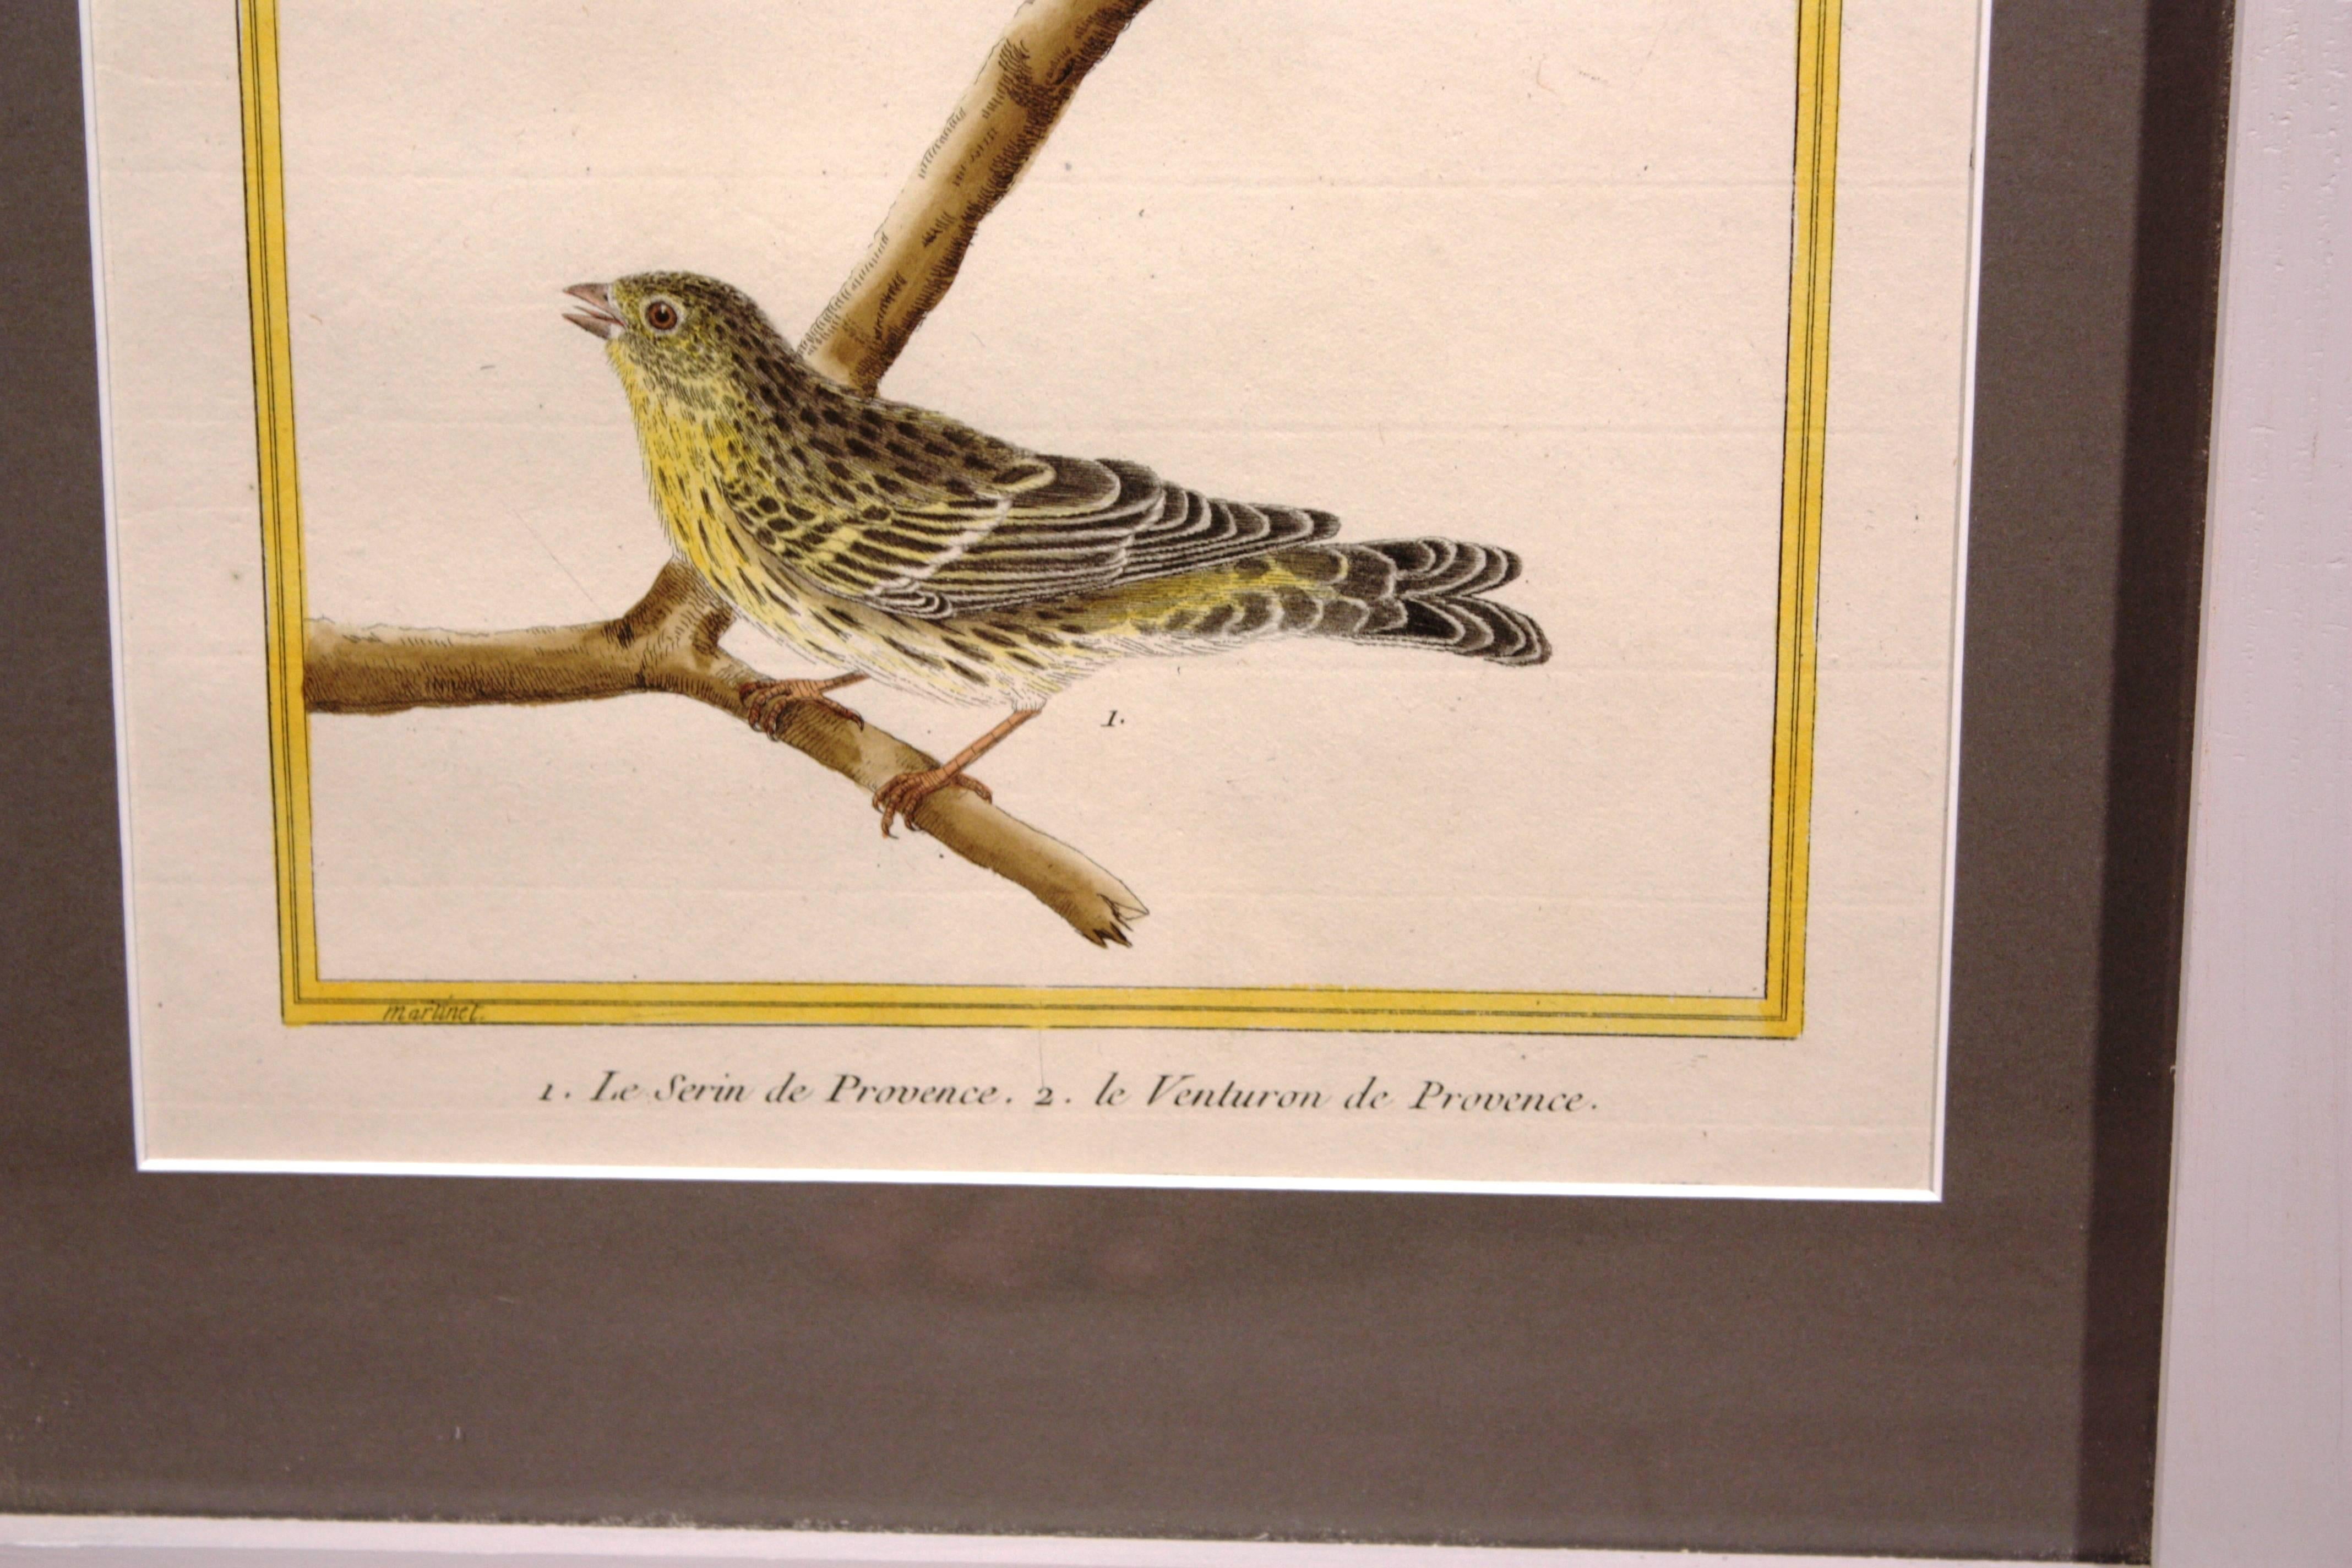 A nice pair of 18th century bird prints by Francois Nicholas Martinet in custom frames, from the Histoire Naturelle des Oiseaux, 1770.